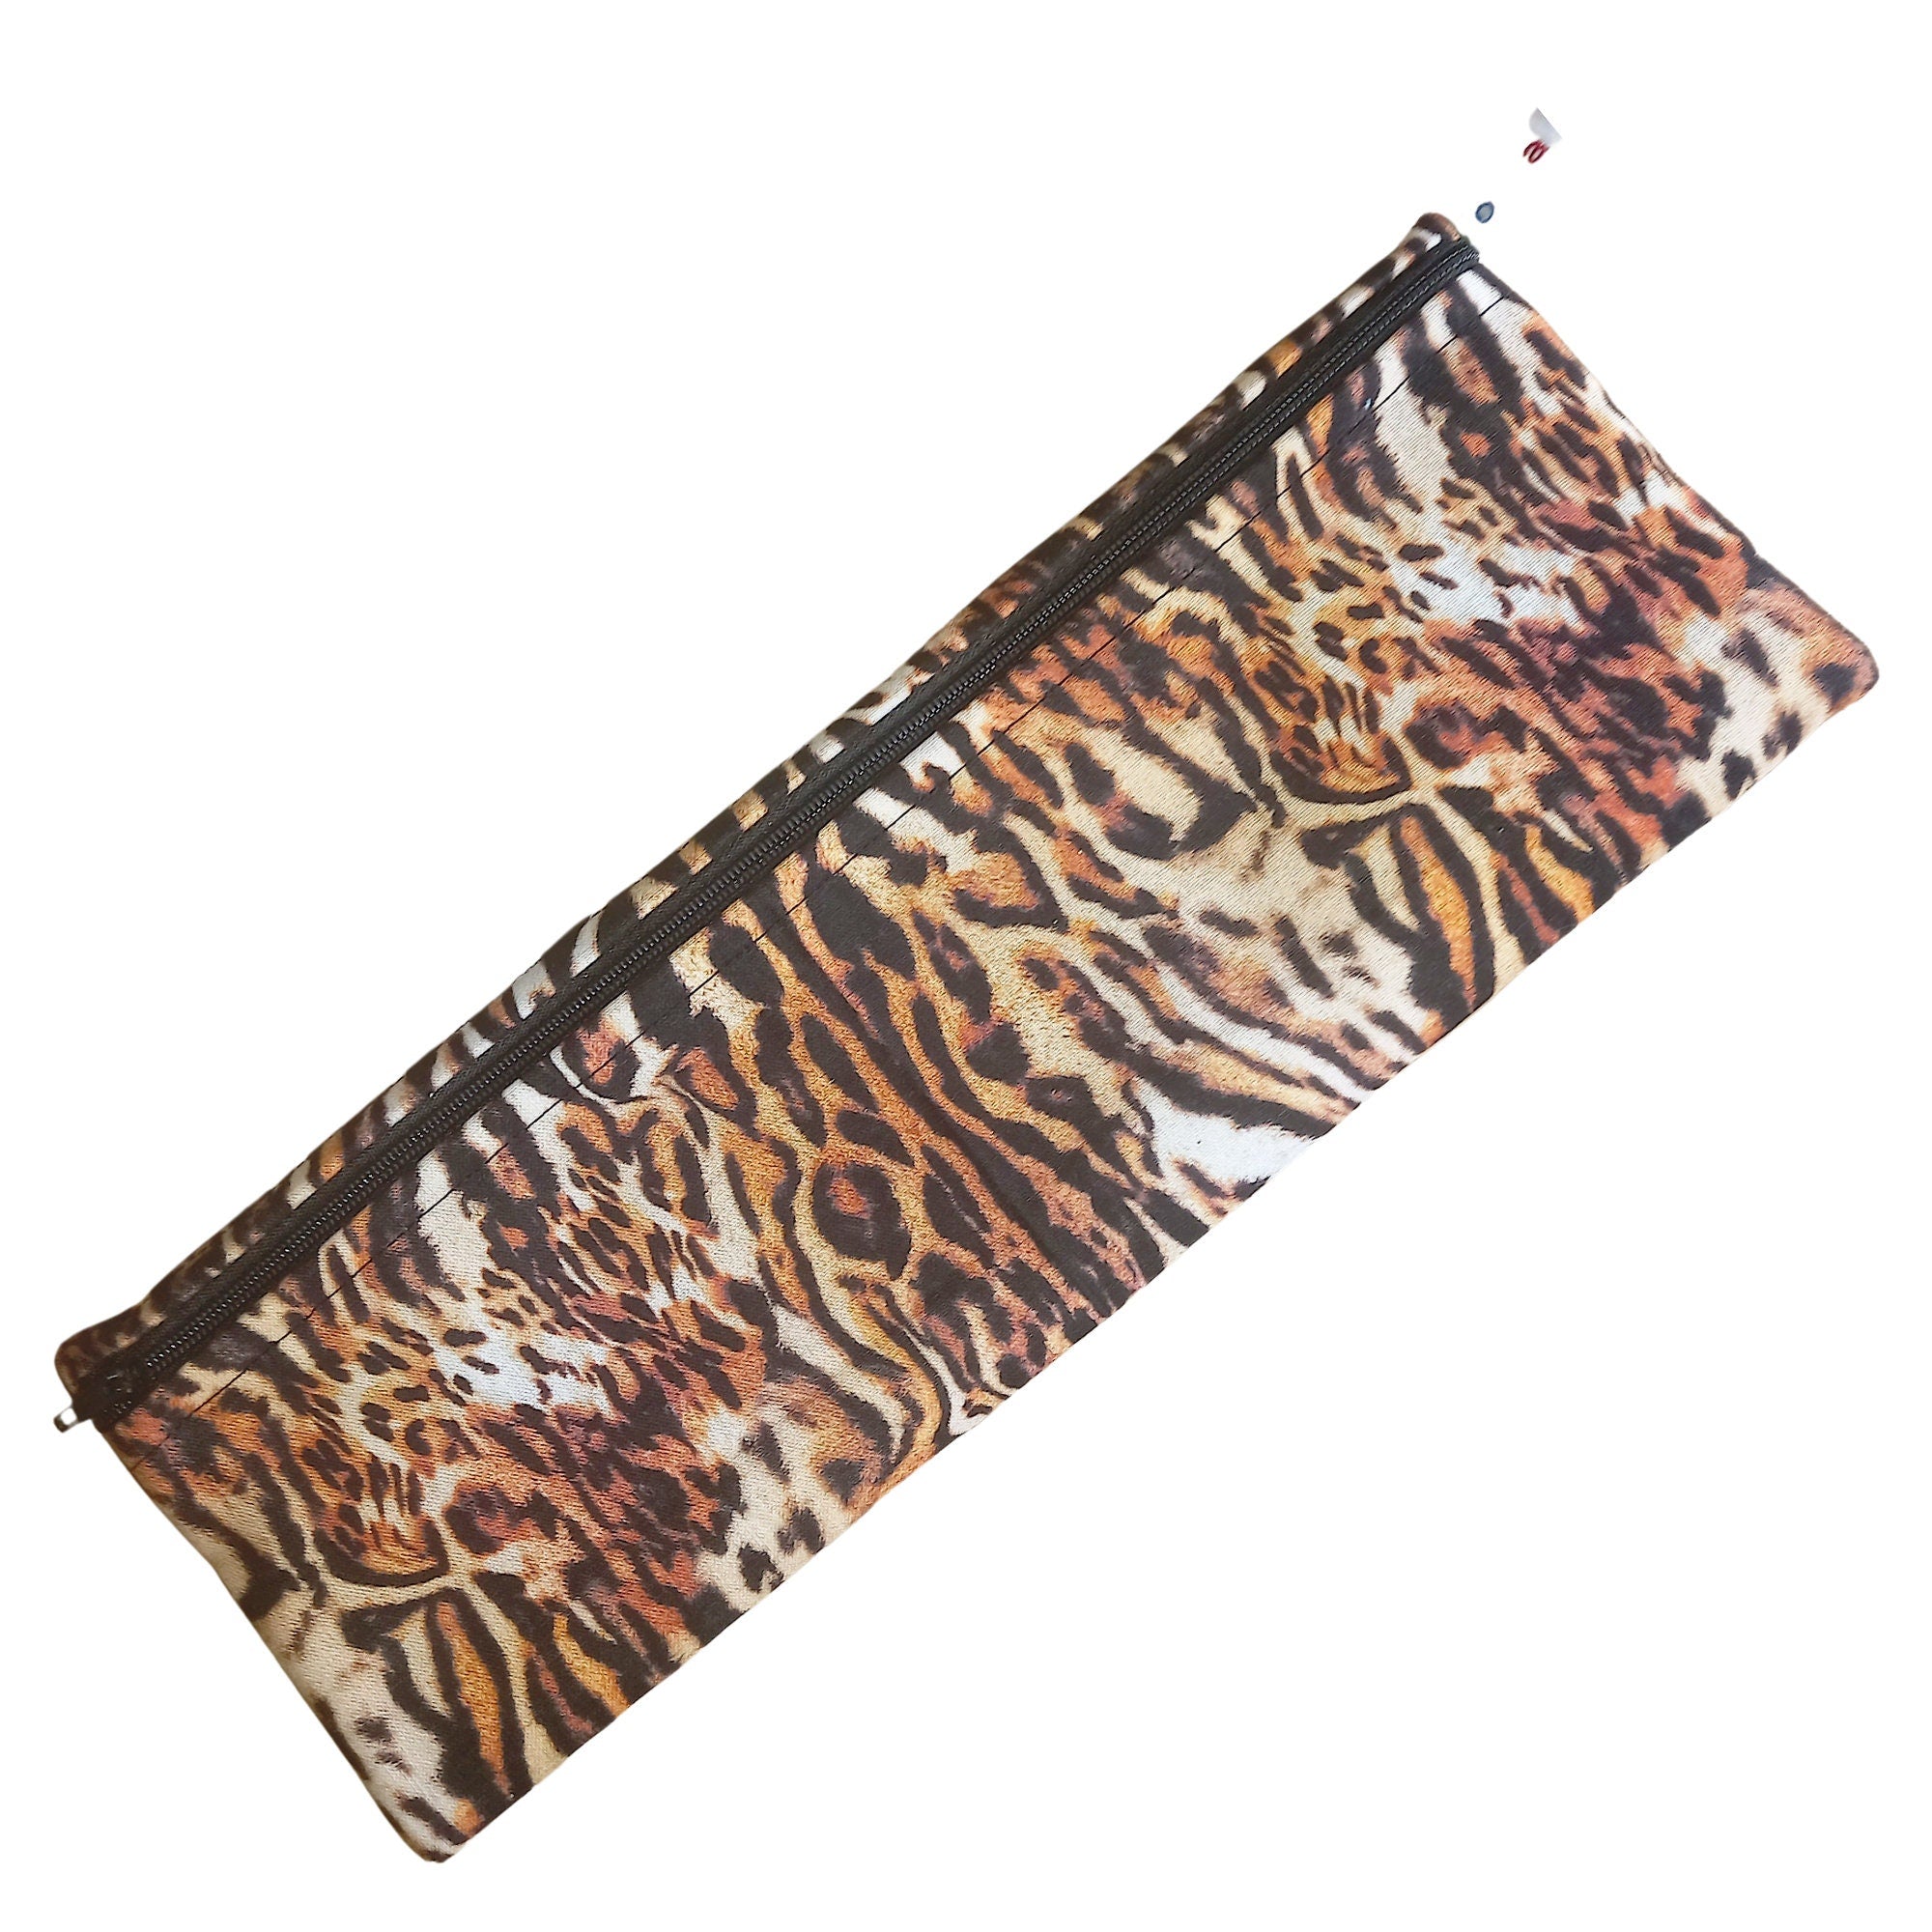 Straw Cutlery Pouch Extra Large, Toothbrush case, Pencil Bag, Crochet Hook Zip Pouch, Chopstick Case Picnic Work Lunch Tiger Animal Print